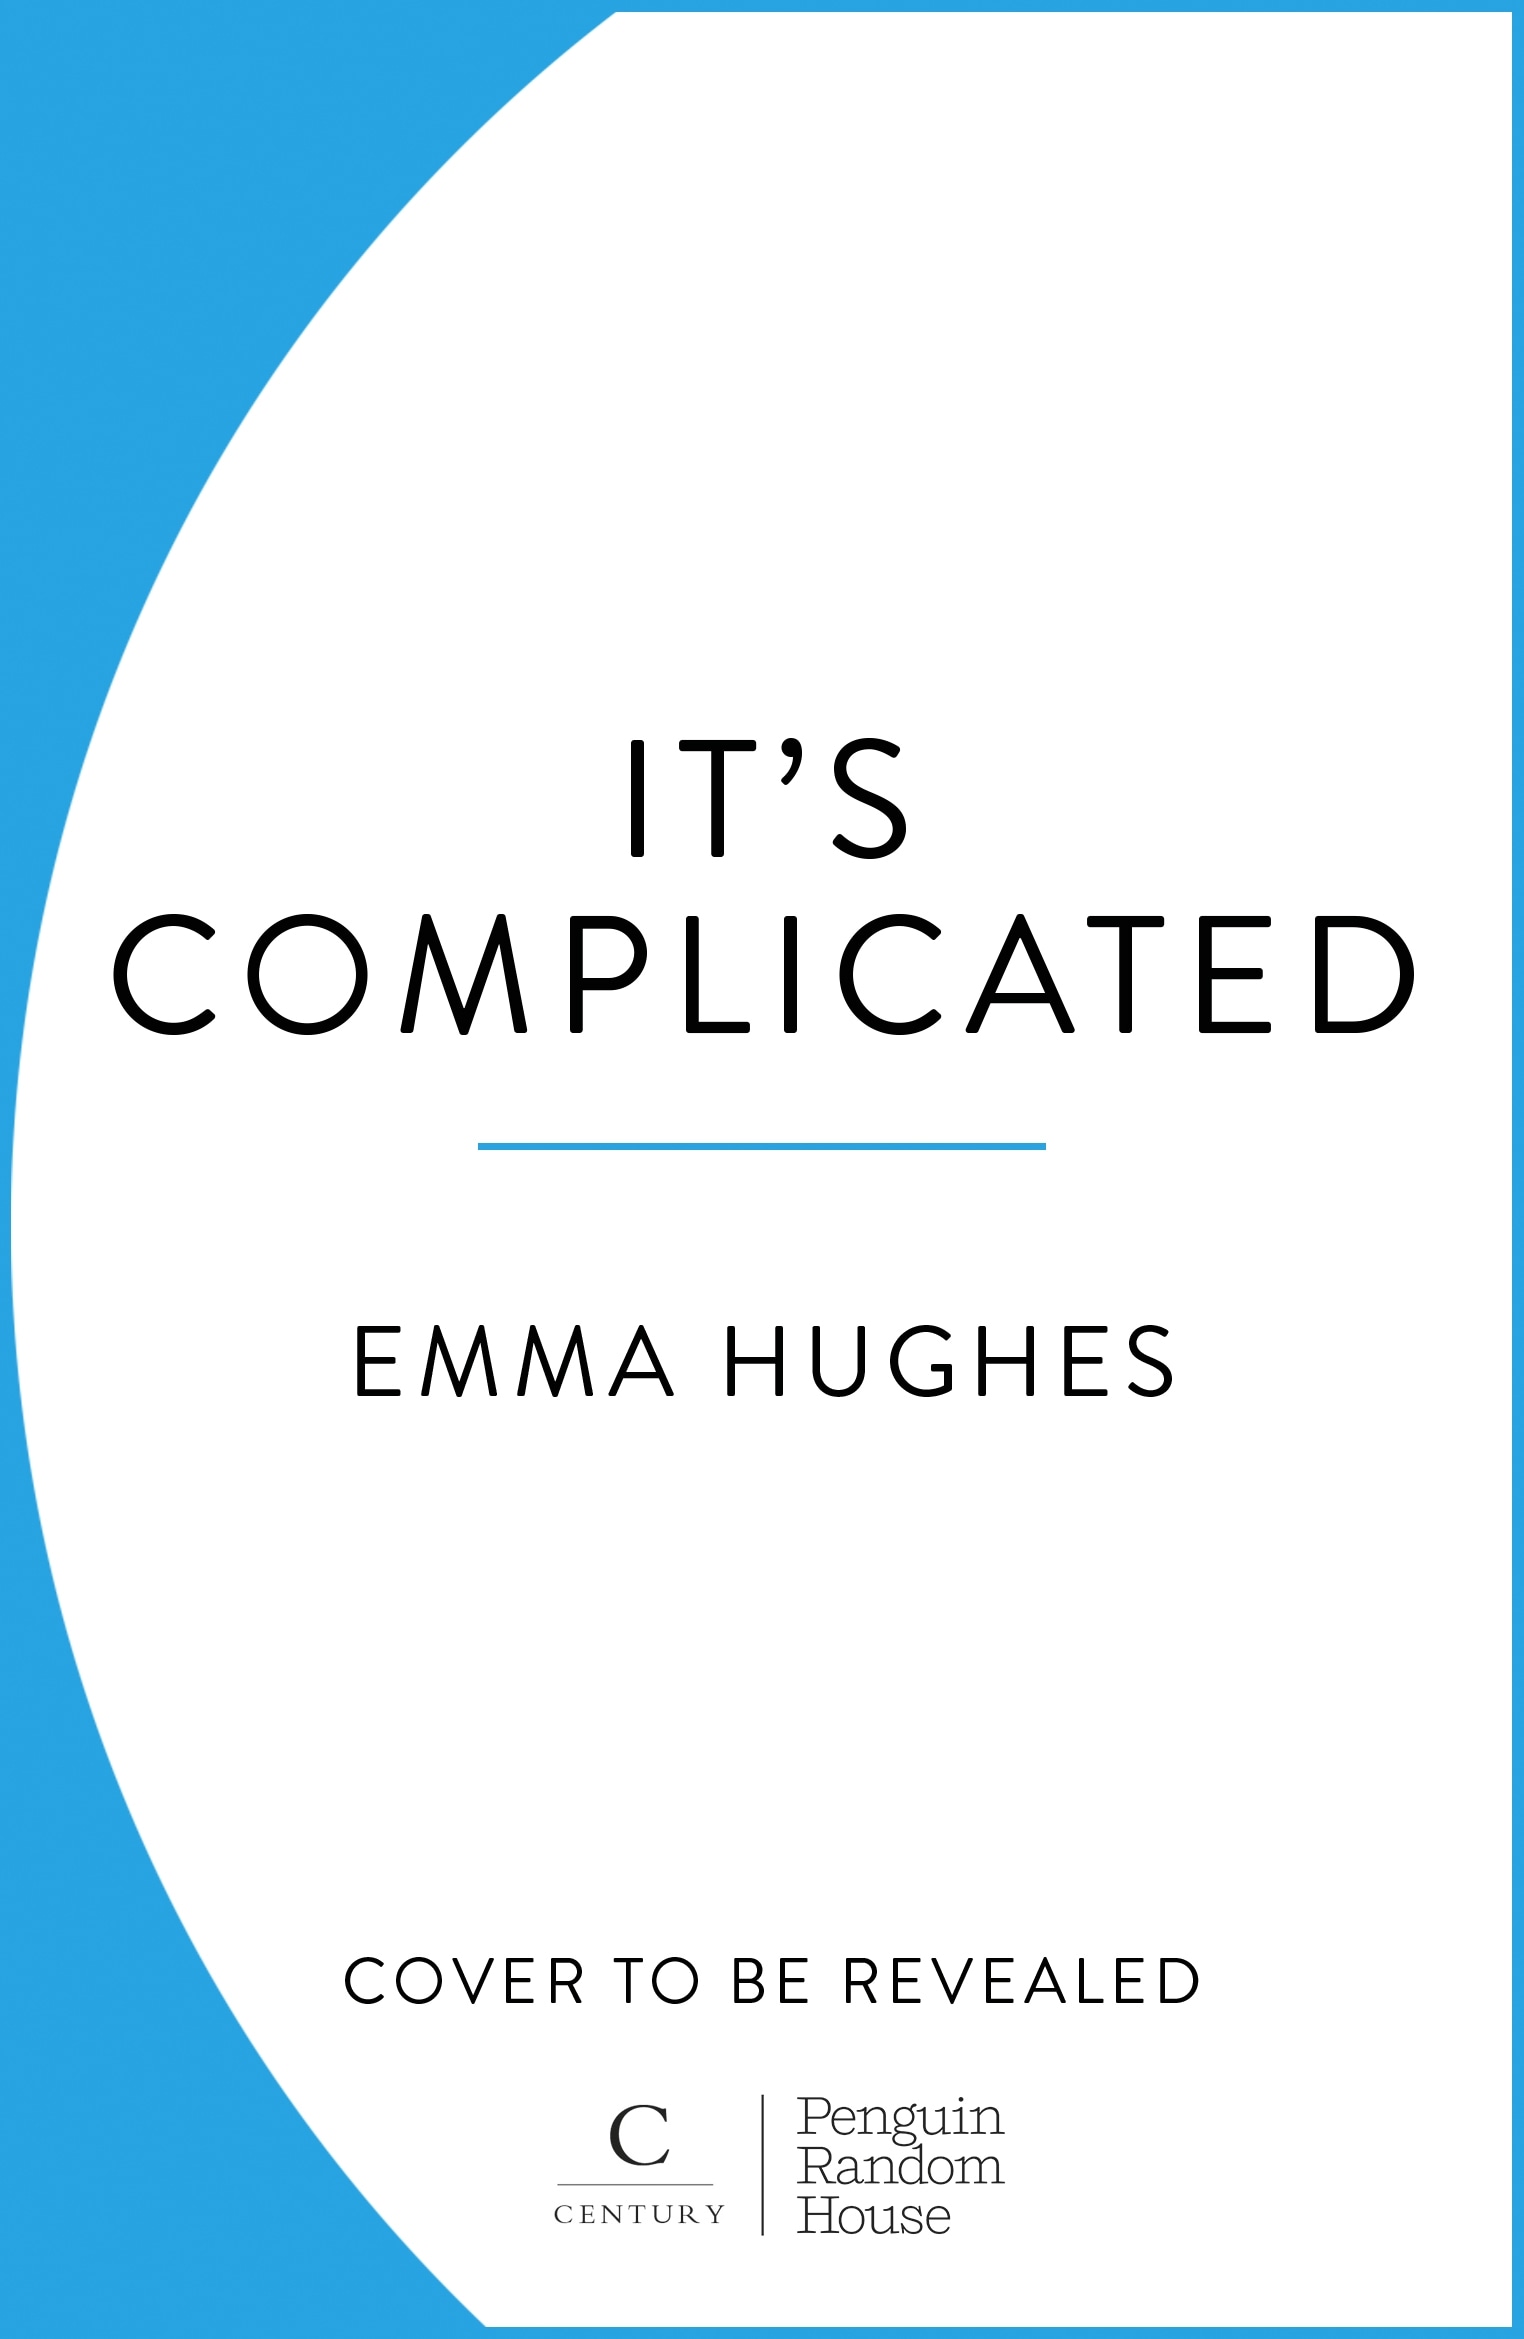 Book “It’s Complicated” by Emma Hughes — March 2, 2023